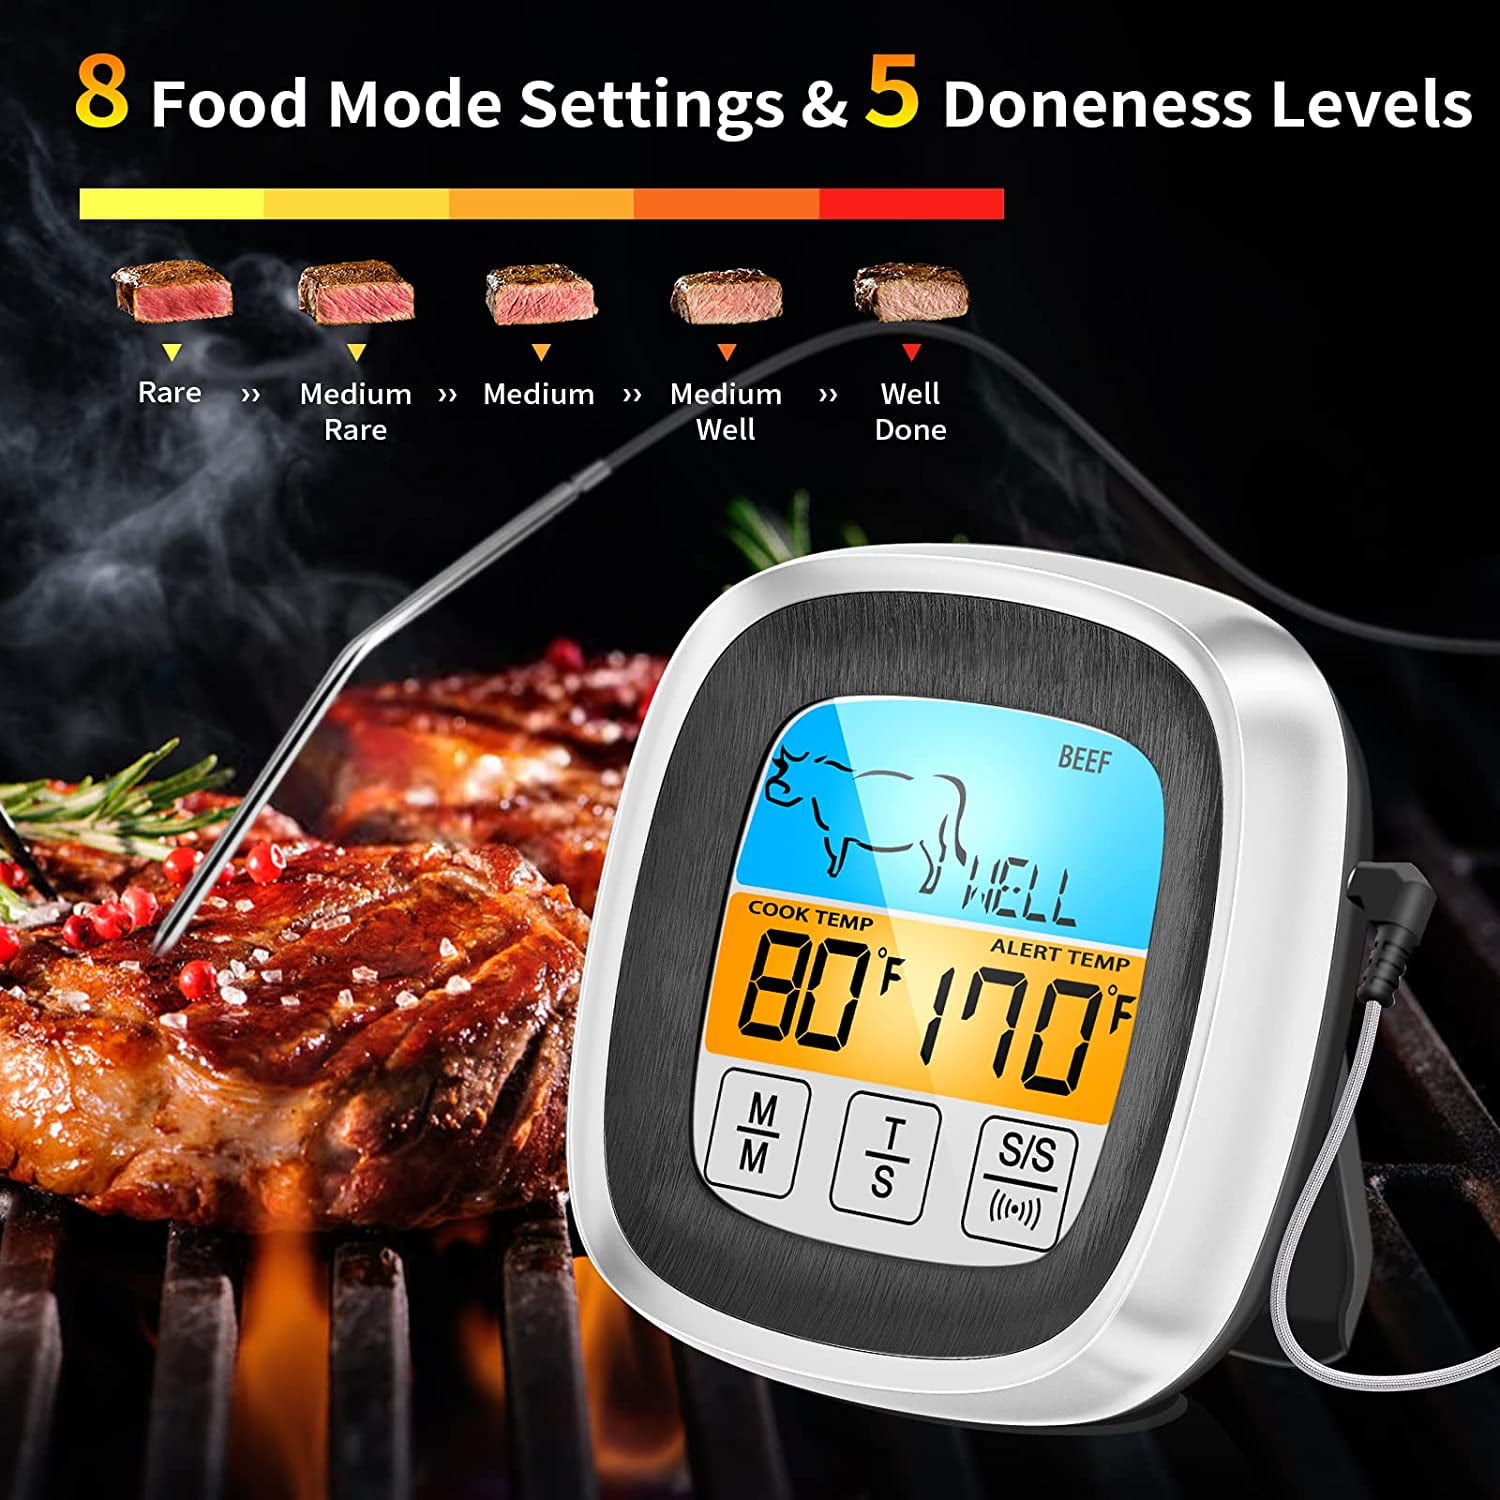 Liquid Crystal Display(LCD) Digital Meat Thermometer with Food Stab Probe  –Cooking Thermometer-Food Thermometer Digital –Grill Thermometer °C /°F